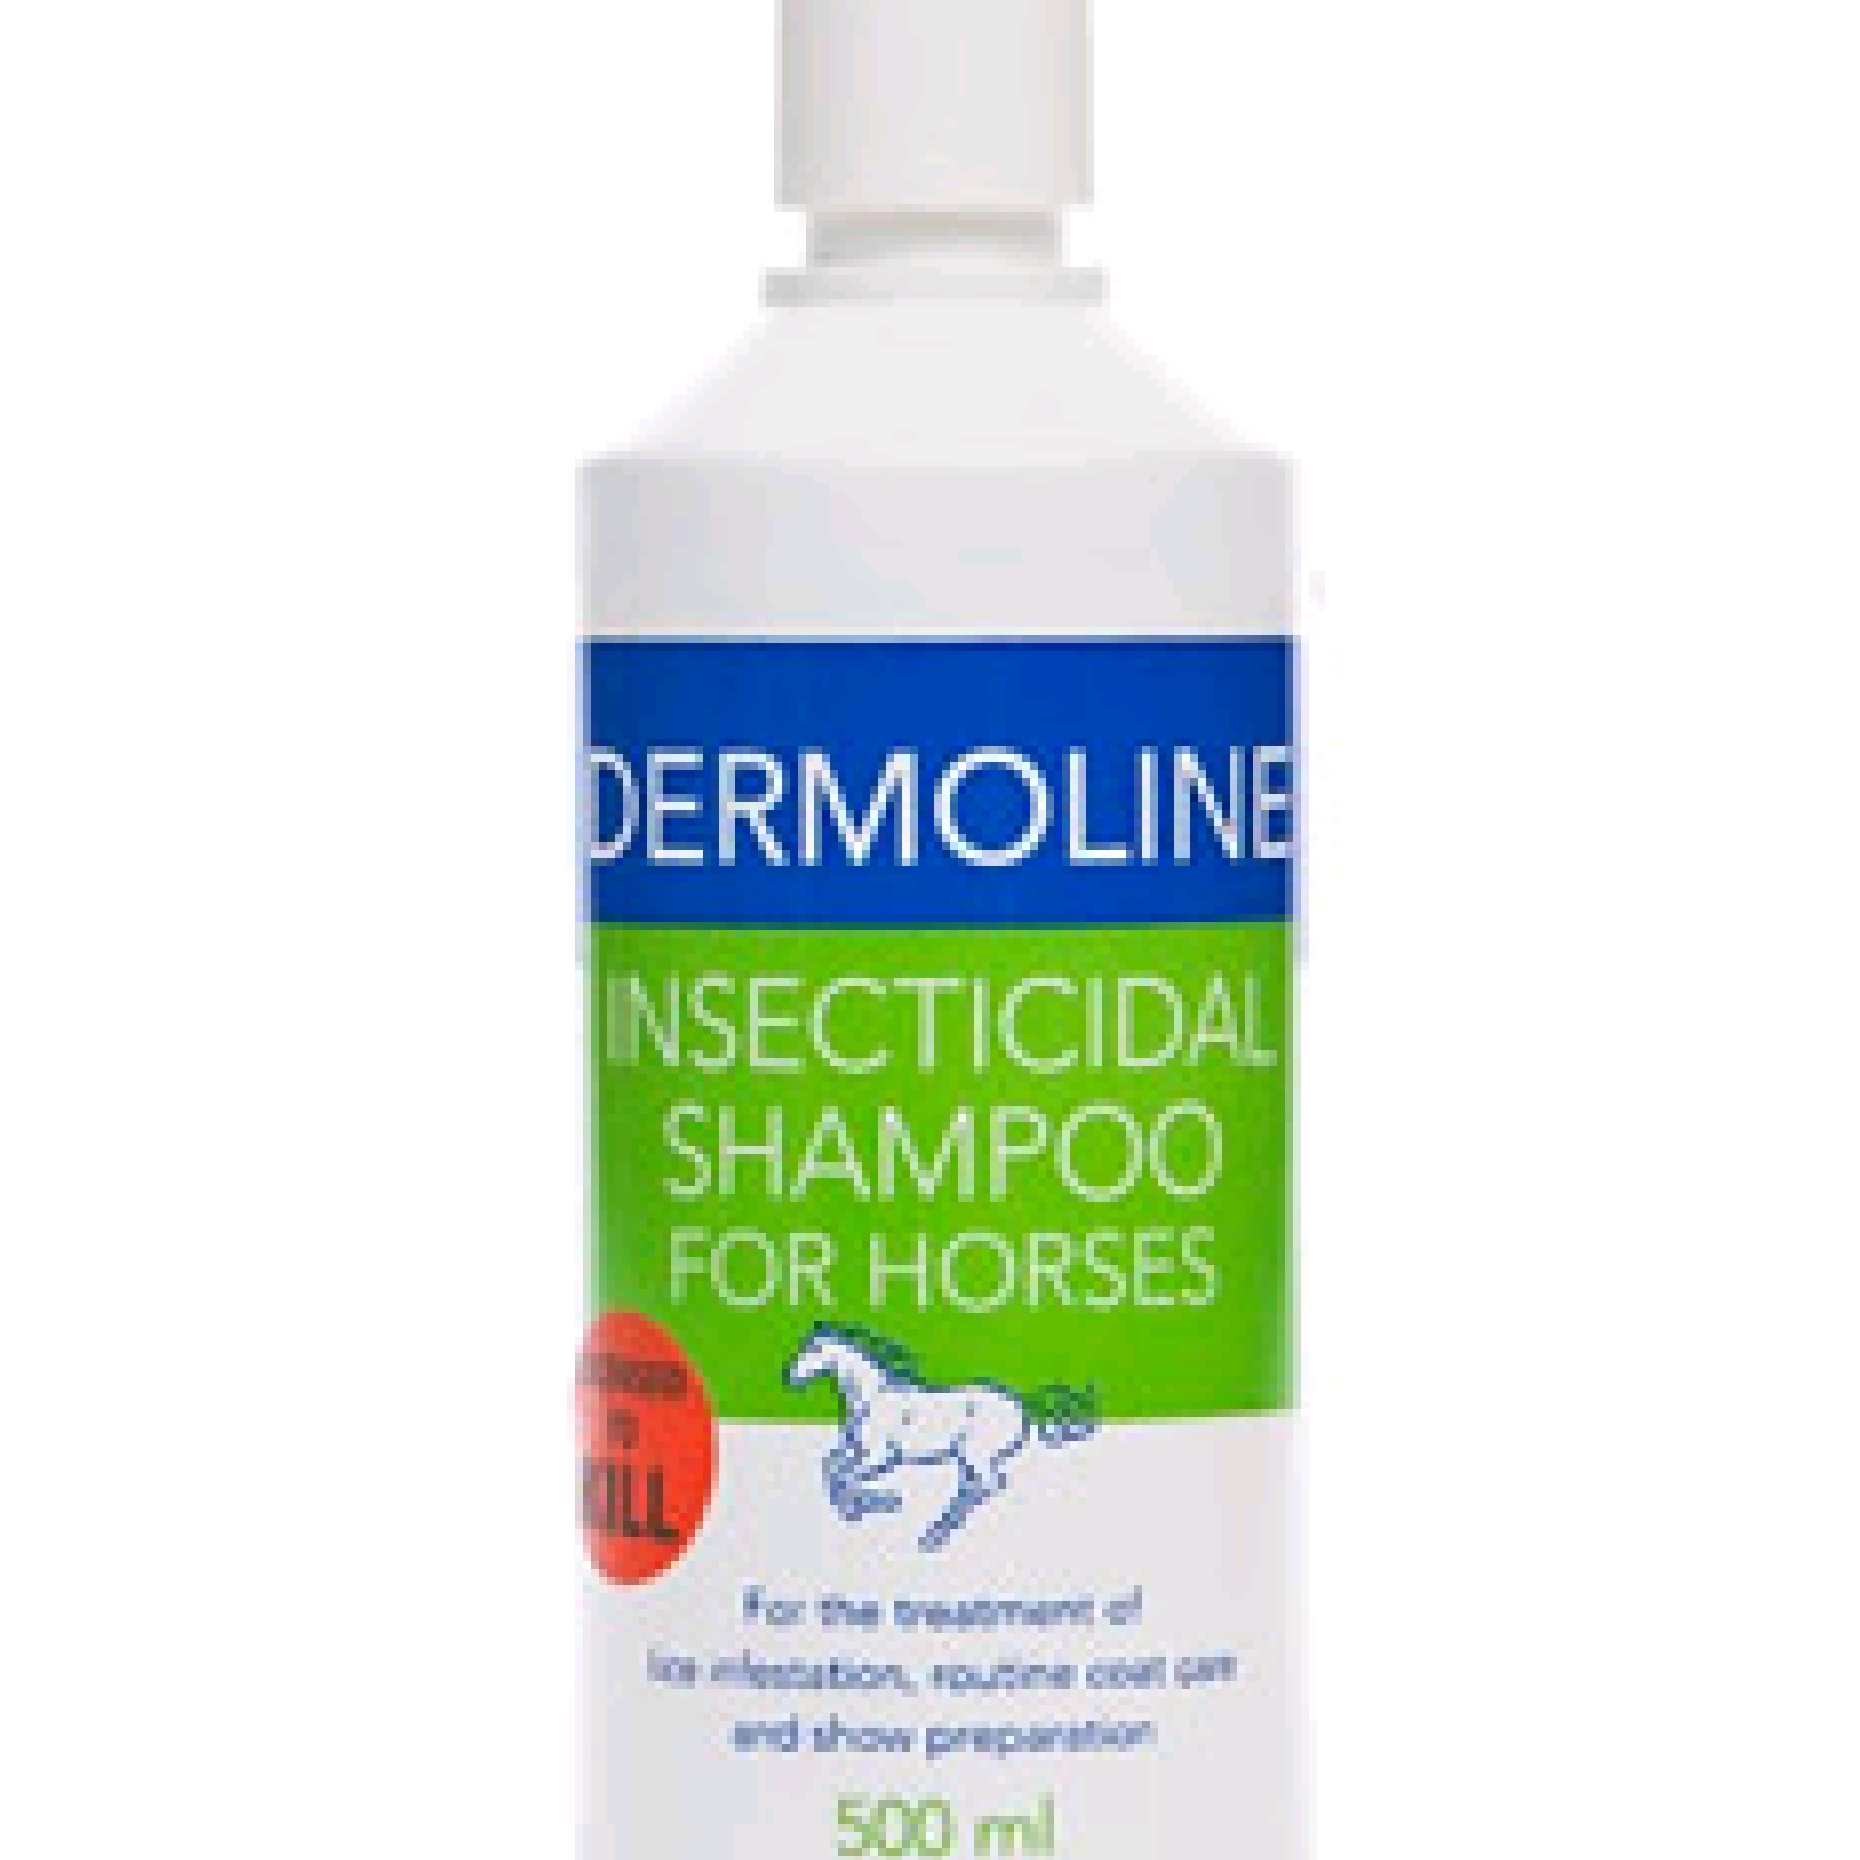 Dermoline Insect Shampoo For Horses